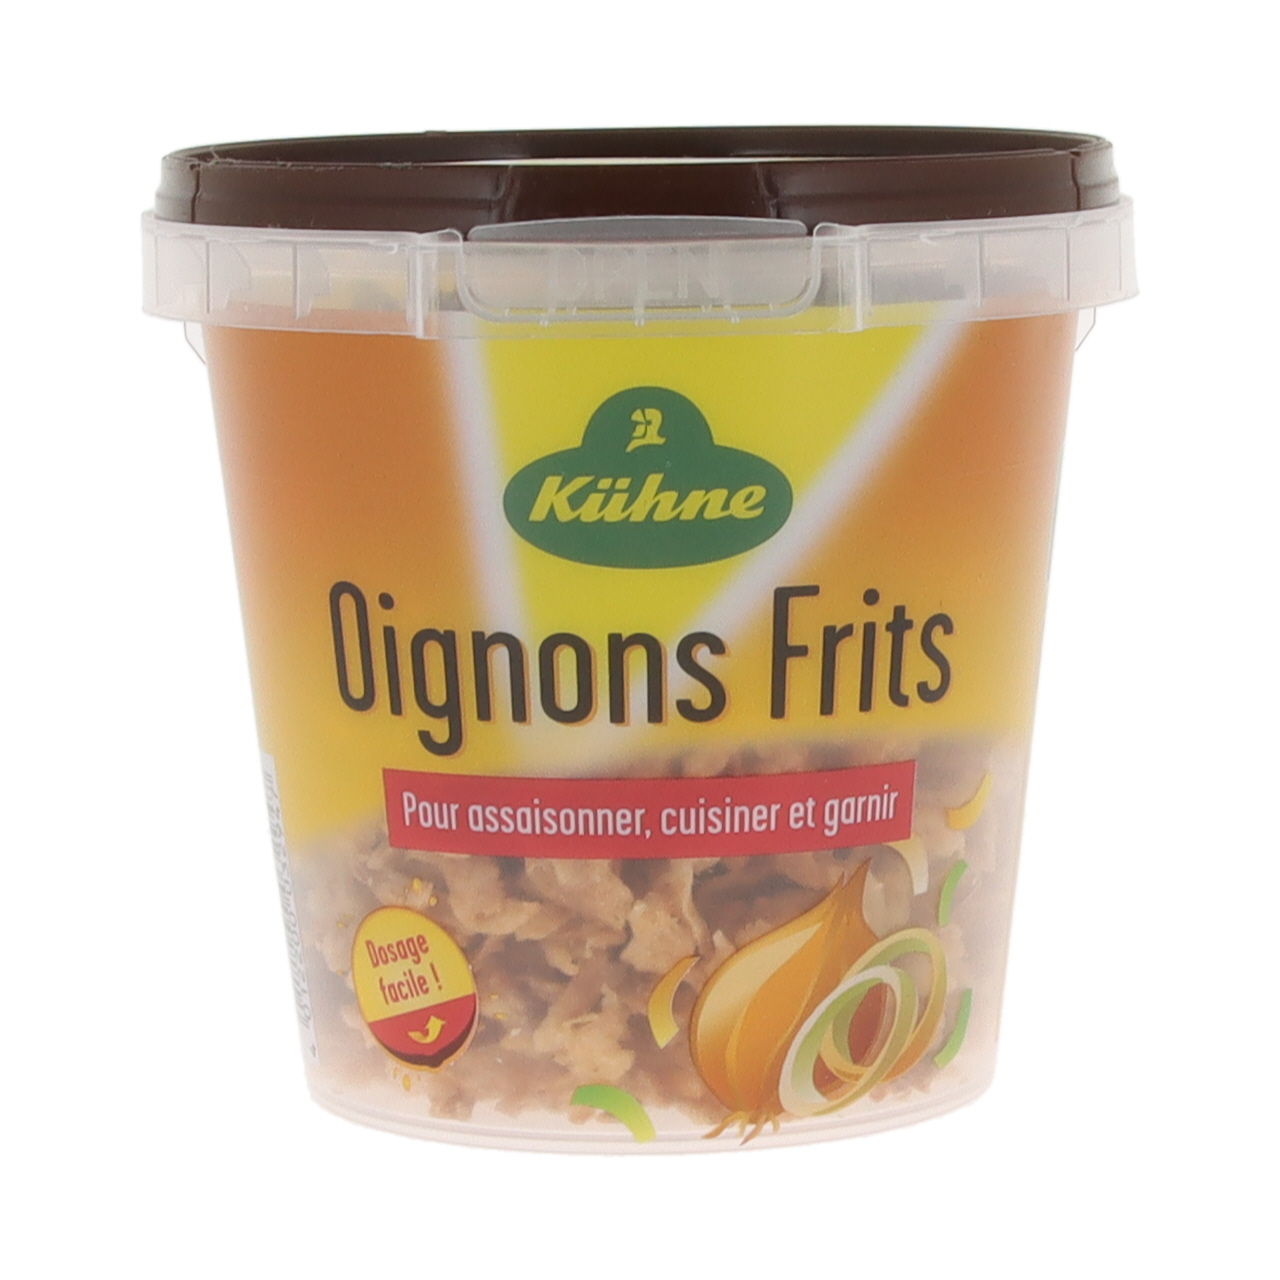 /154-home_default/oignons-frits.